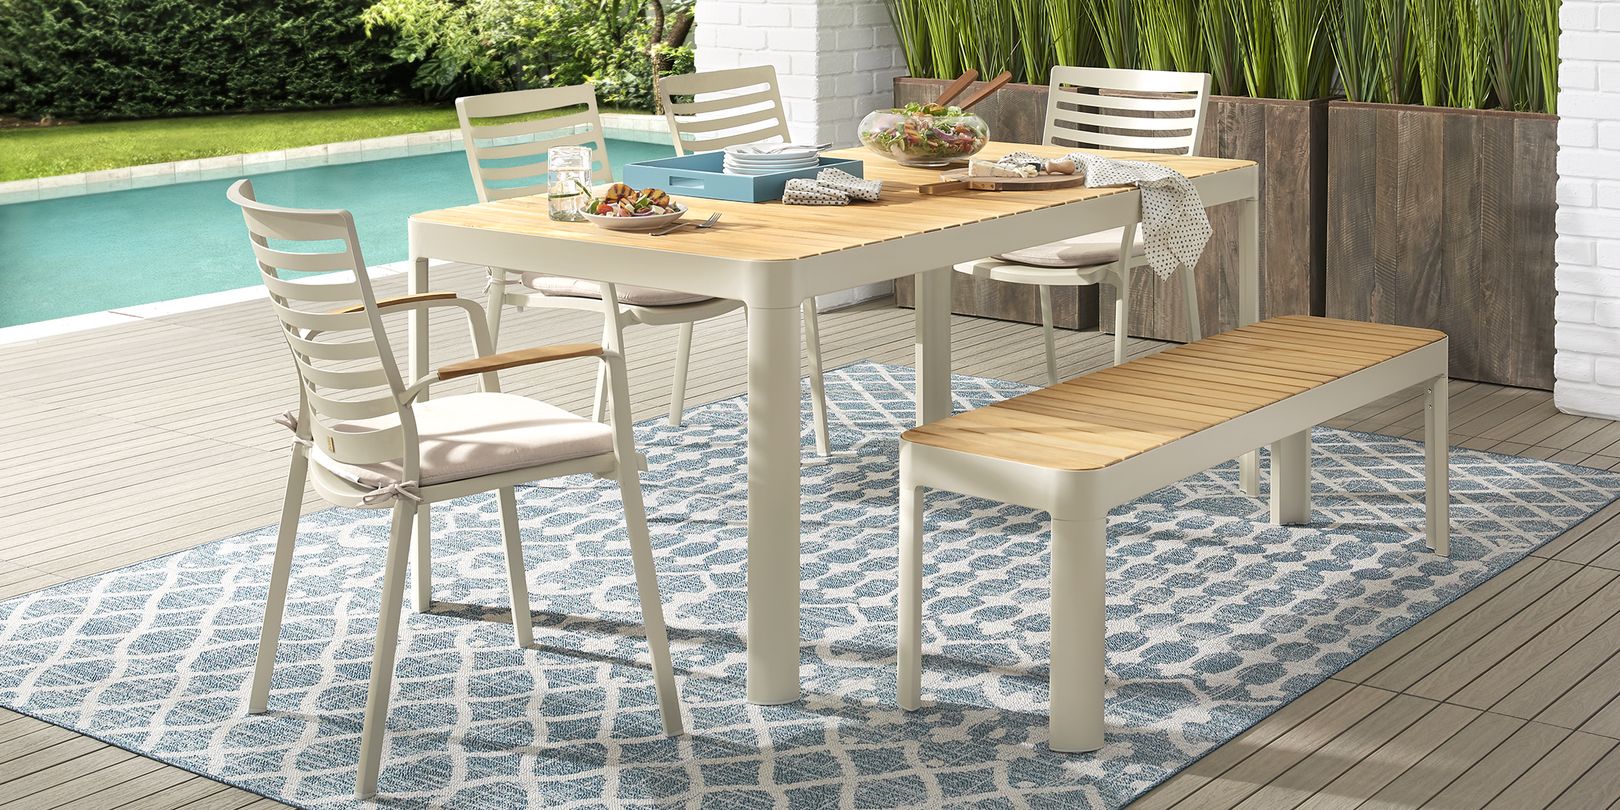 Outdoor dining set with bench